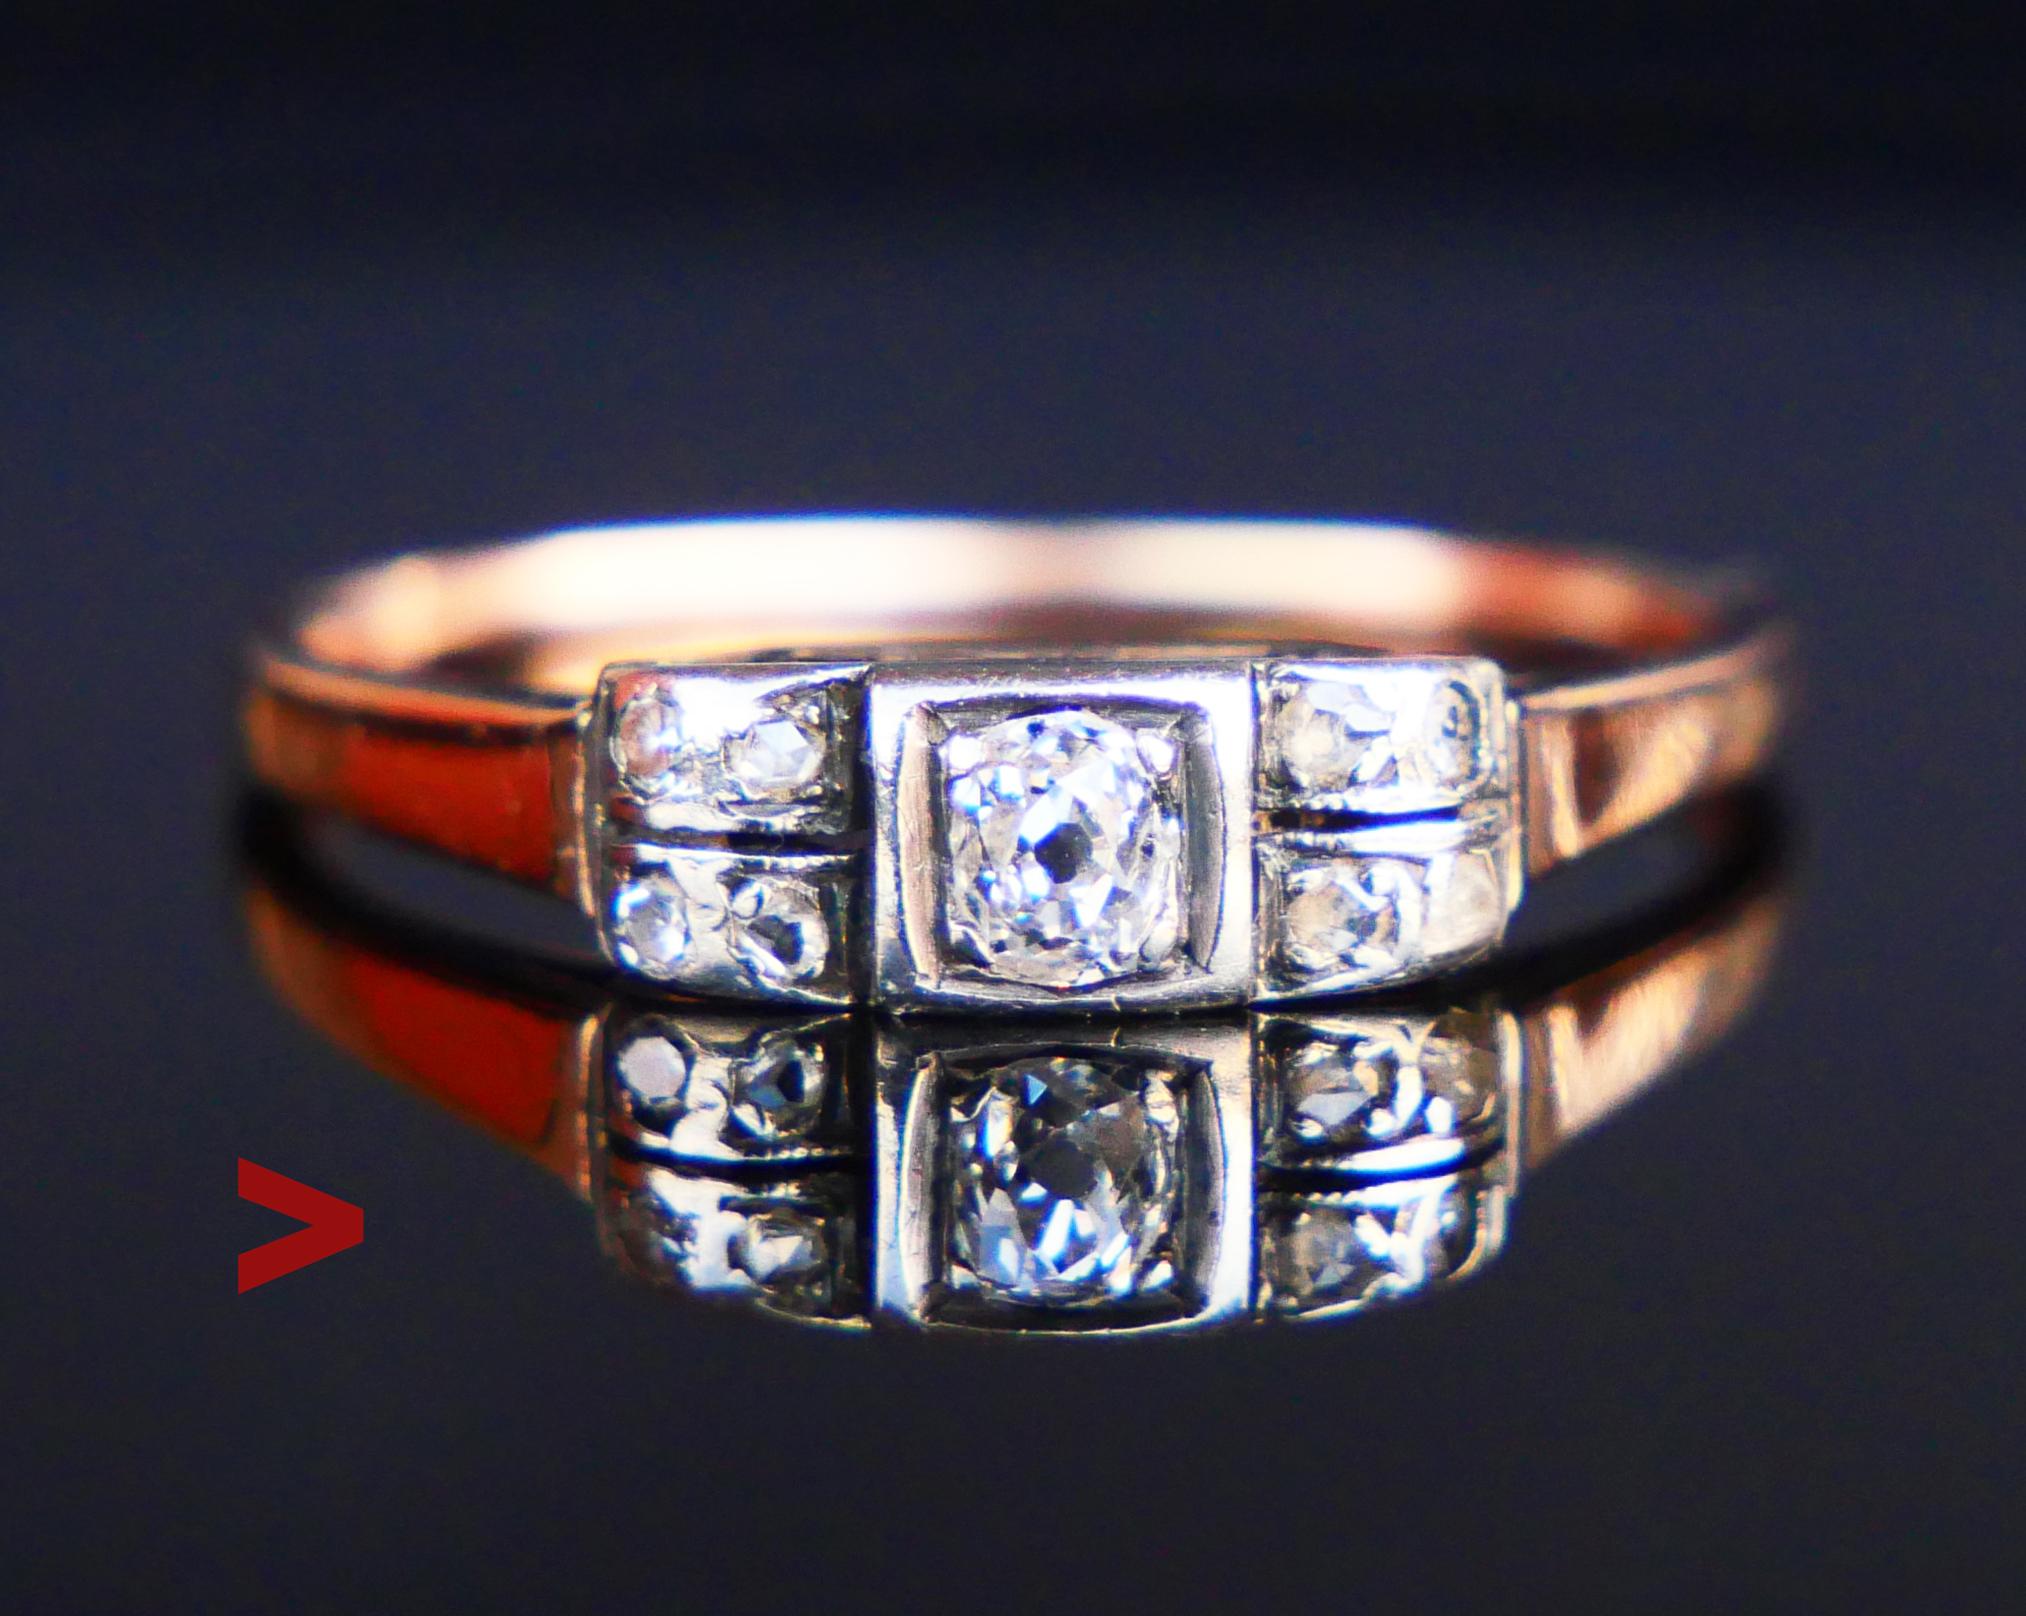 European Ring from ca. 1920s -1930s with crown in White Gold on 14K Rose Gold band.

Nine Diamonds : largest is bezel set old European oval cut Diamond Ø 3.5 mm x 3 mm x 2.66 mm deep / ca.0.25ct + 8 minor rose cut and old diamond cut Diamonds Ø 1.25